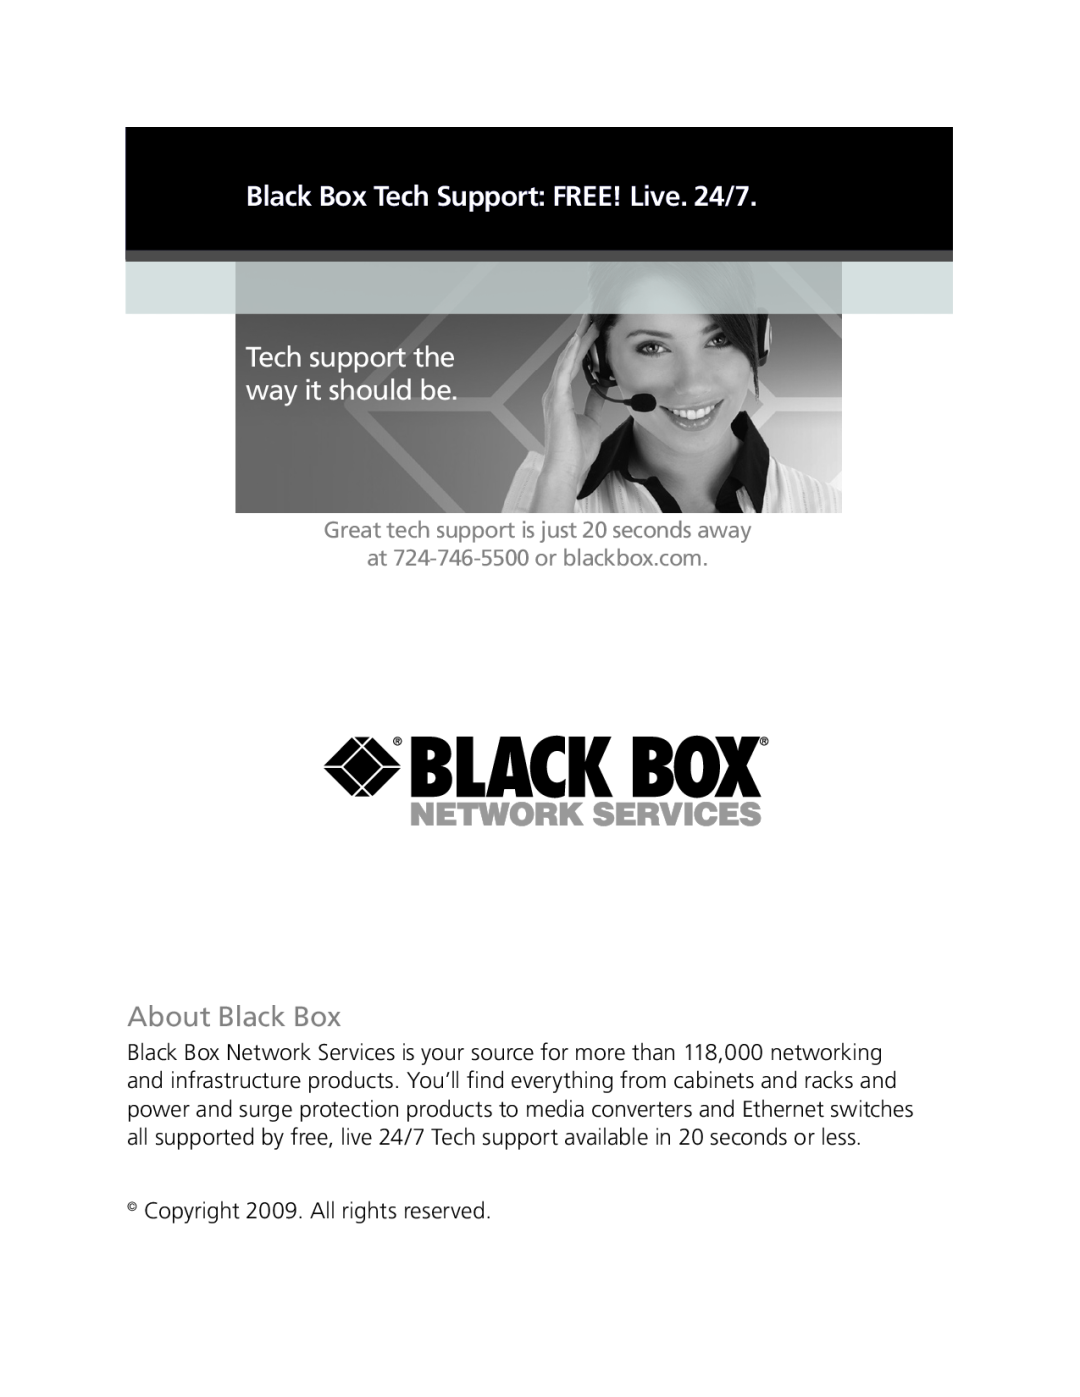 Black Box PG-VGA manual Tech support the way it should be, Black Box Tech Support FREE! Live. 24/7, About Black Box 